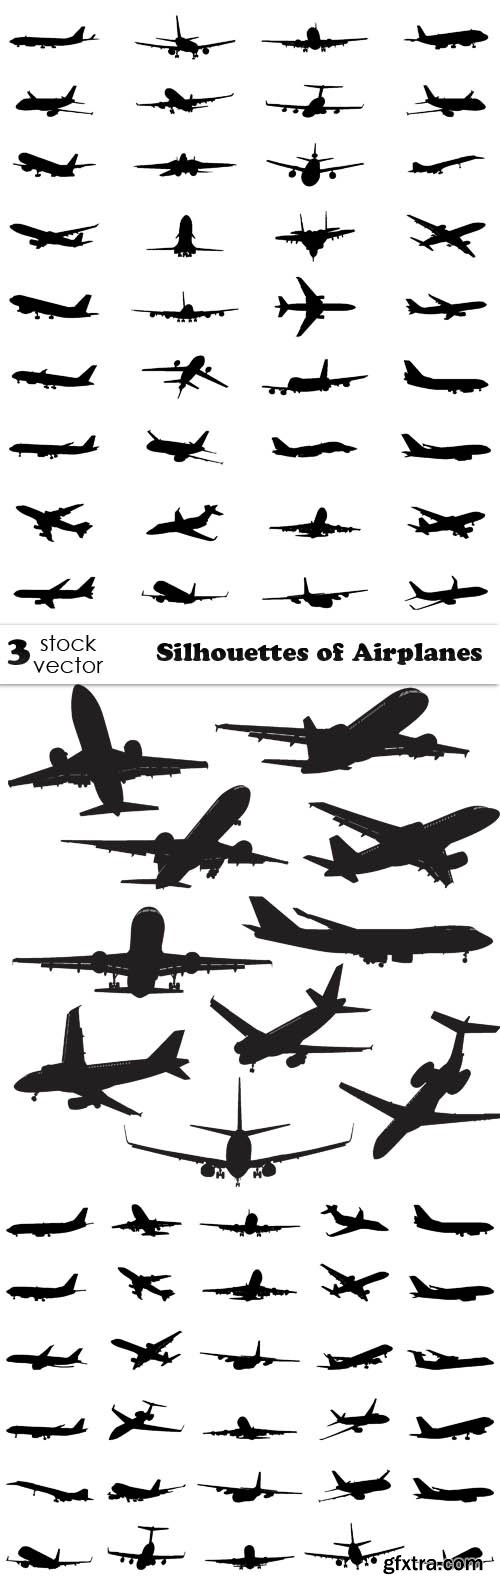 Vectors - Silhouettes of Airplanes